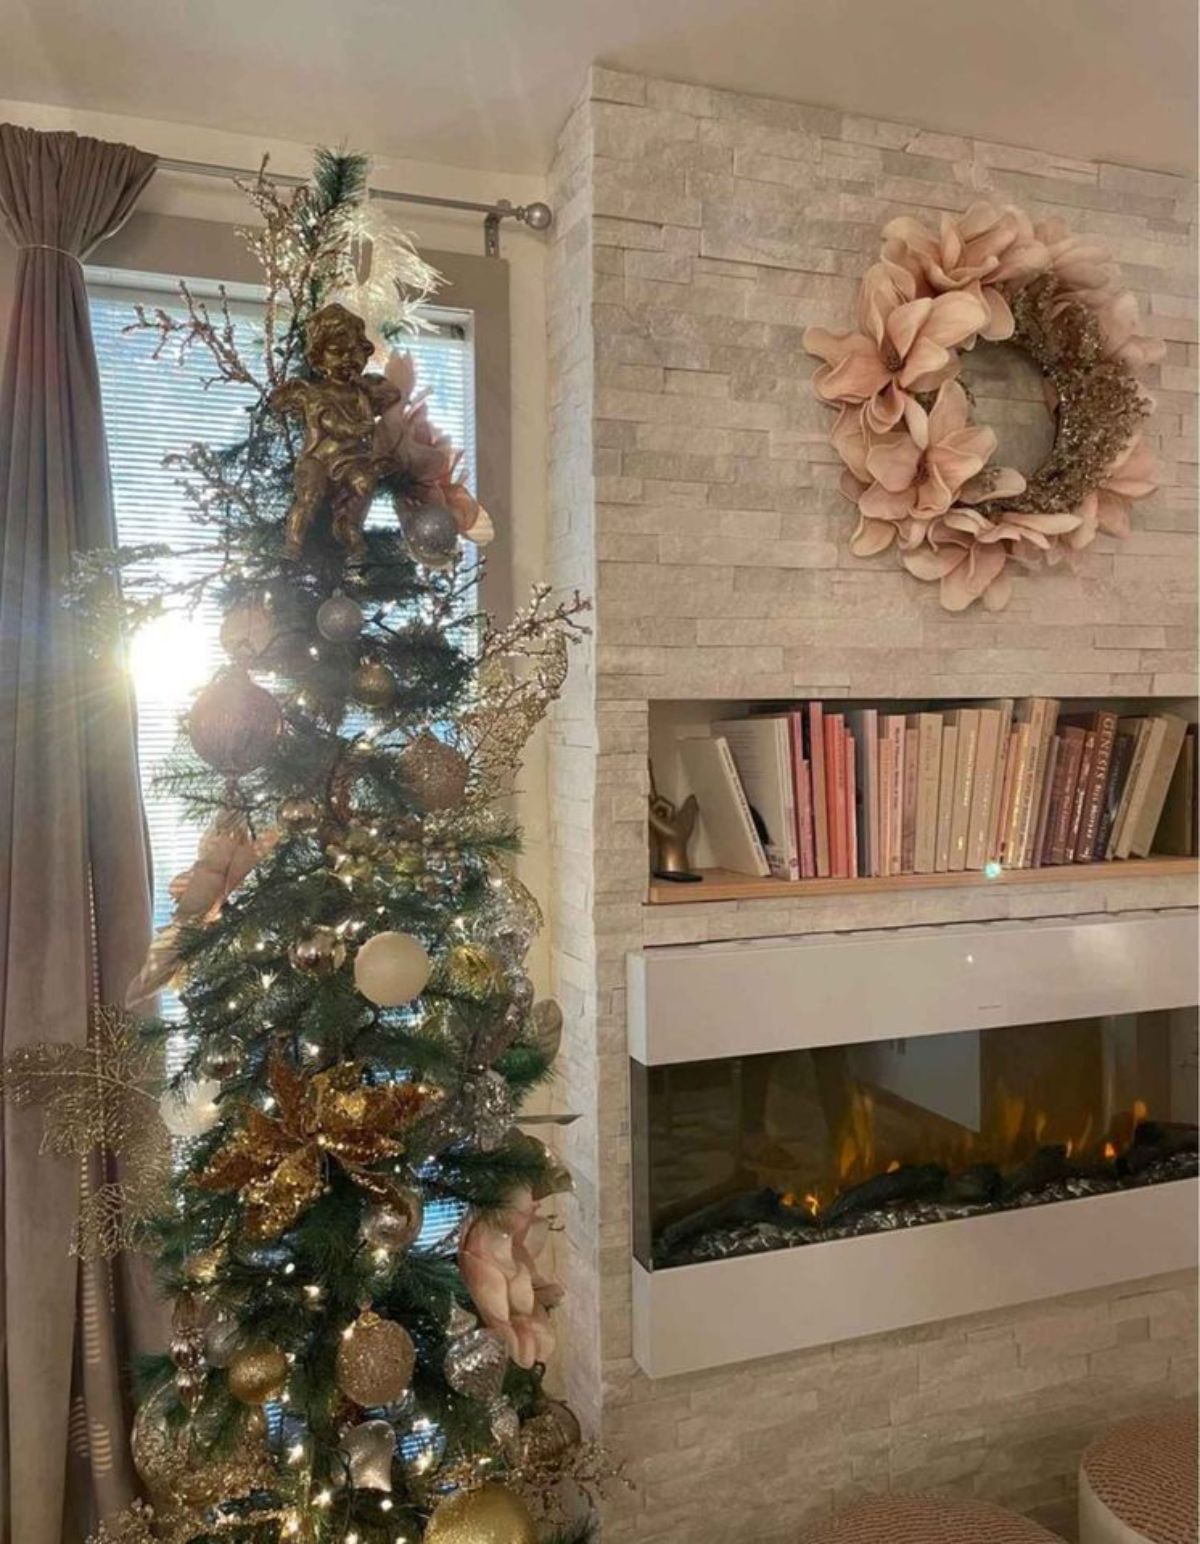 Stunning stone made wall book storage  and decorated tree makes this house more elegant and beautiful